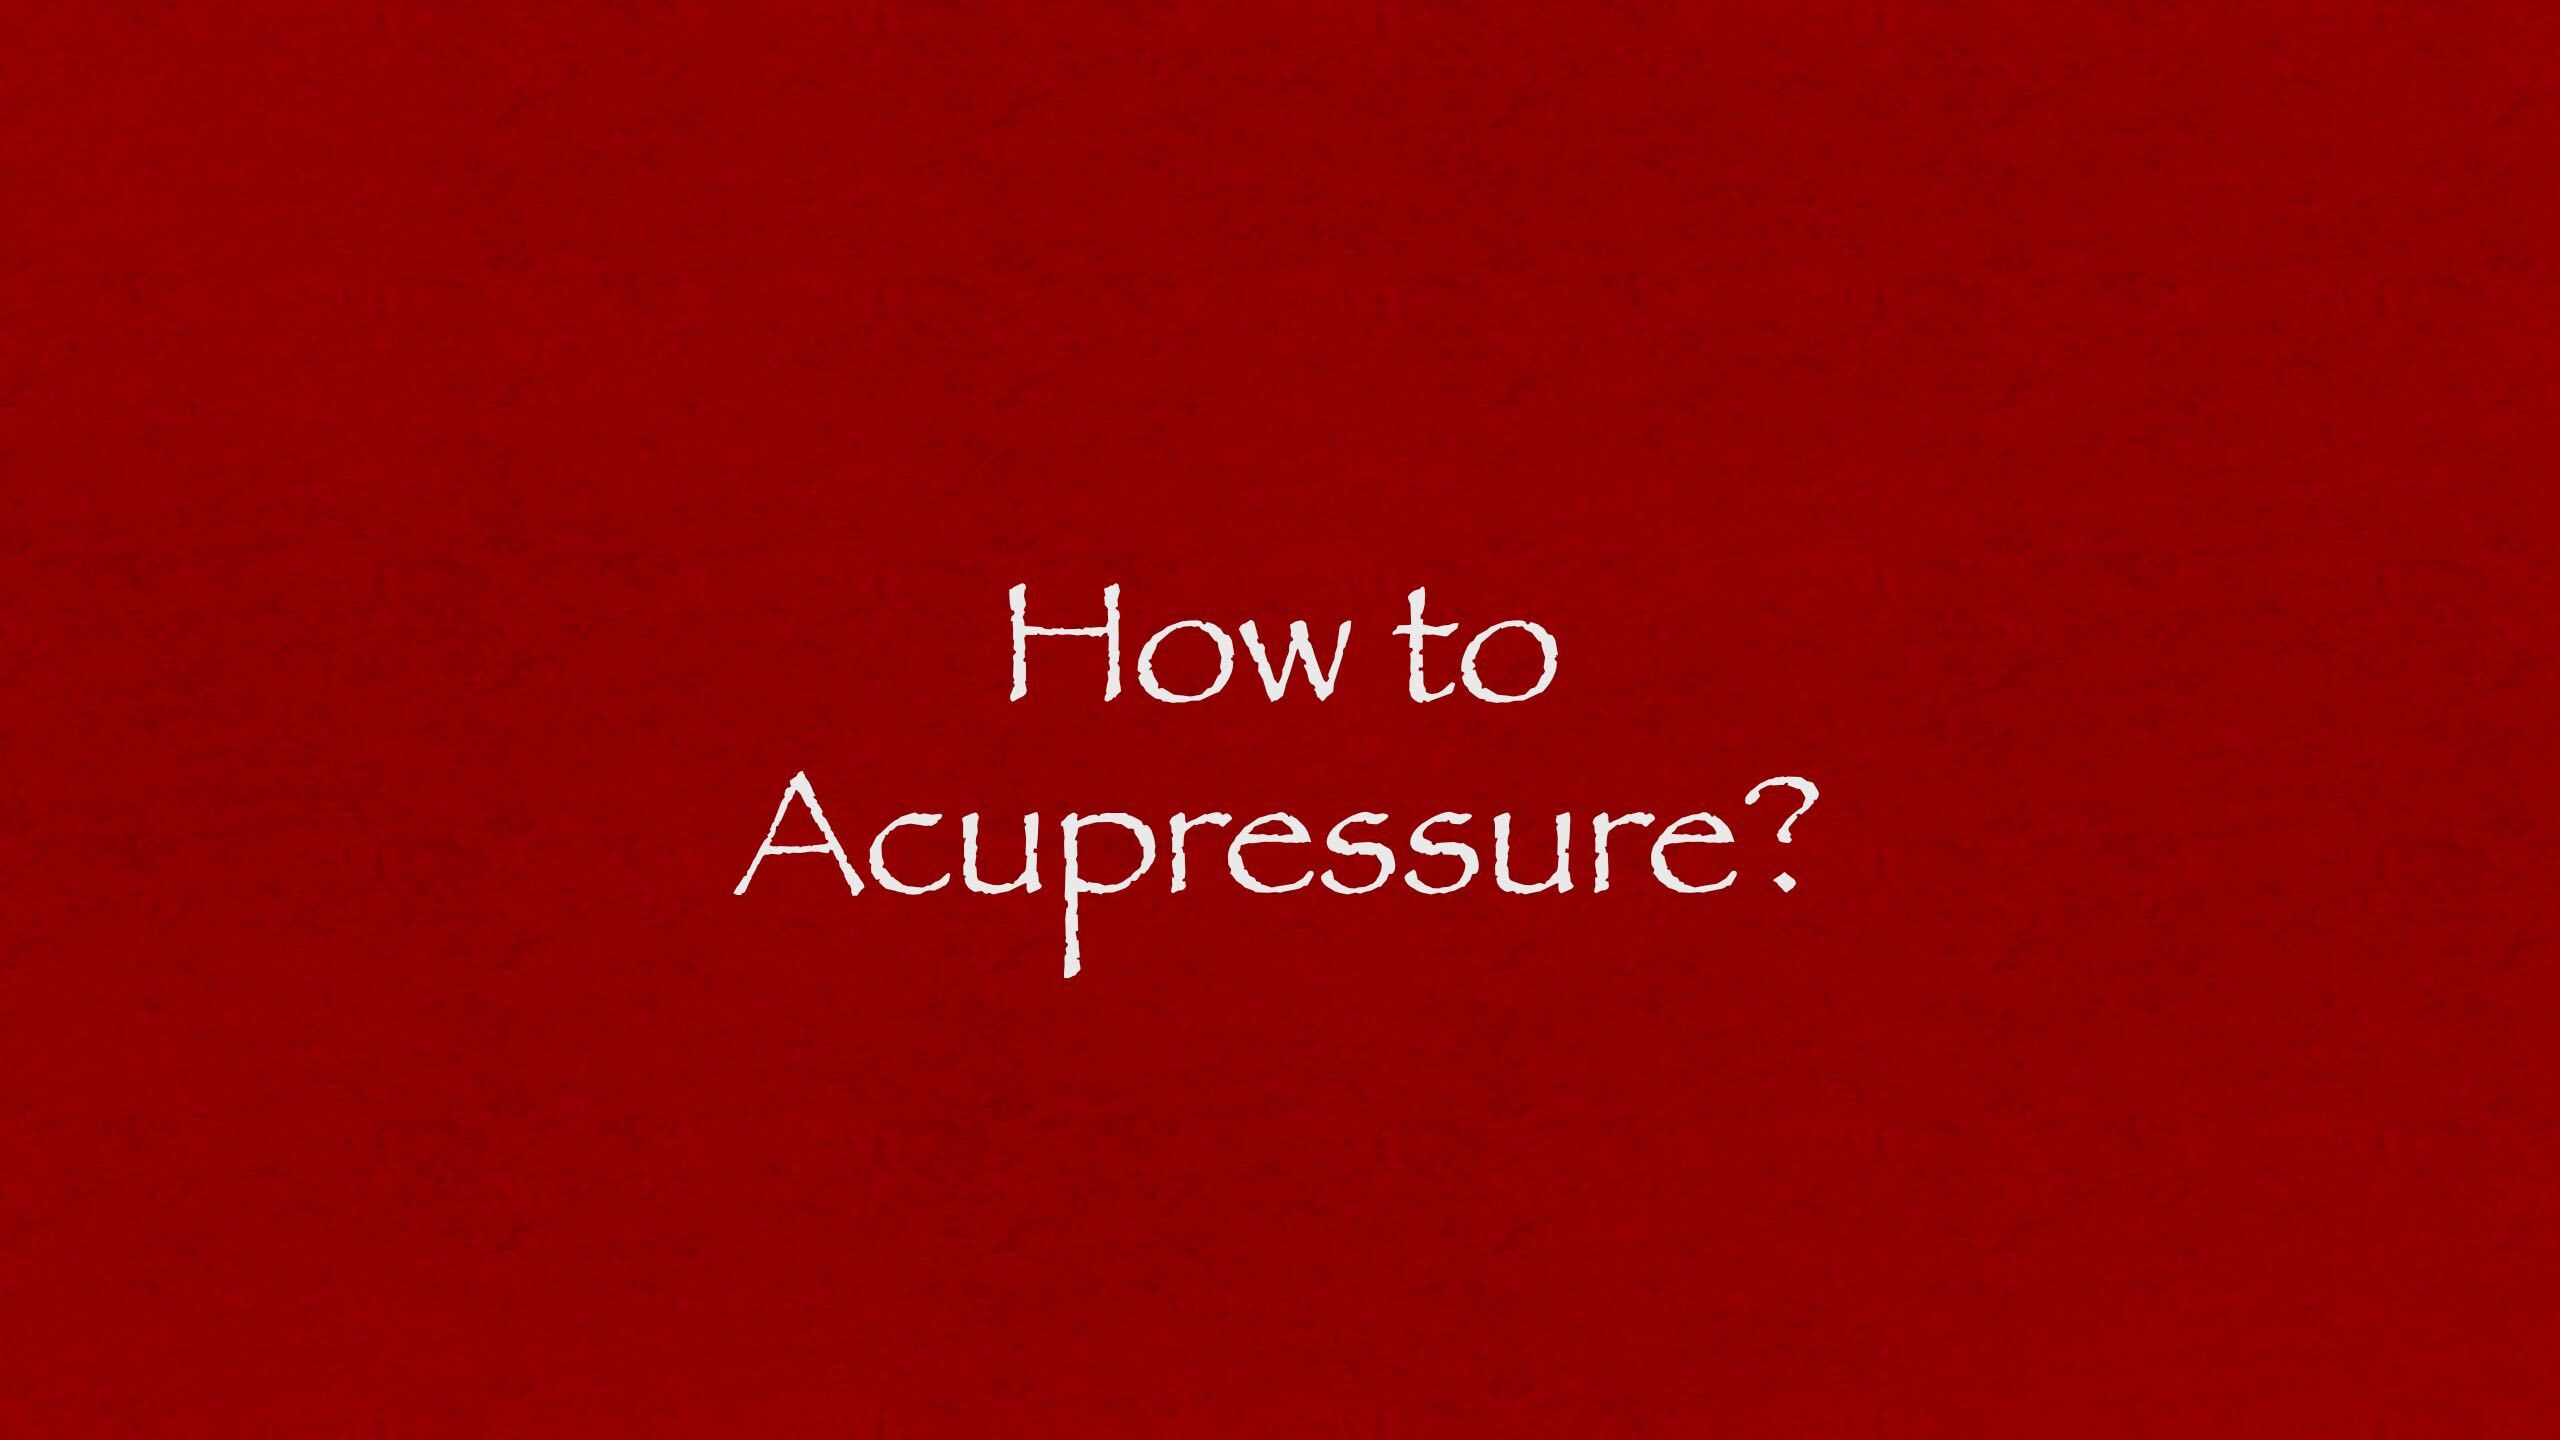 How to Acupressure